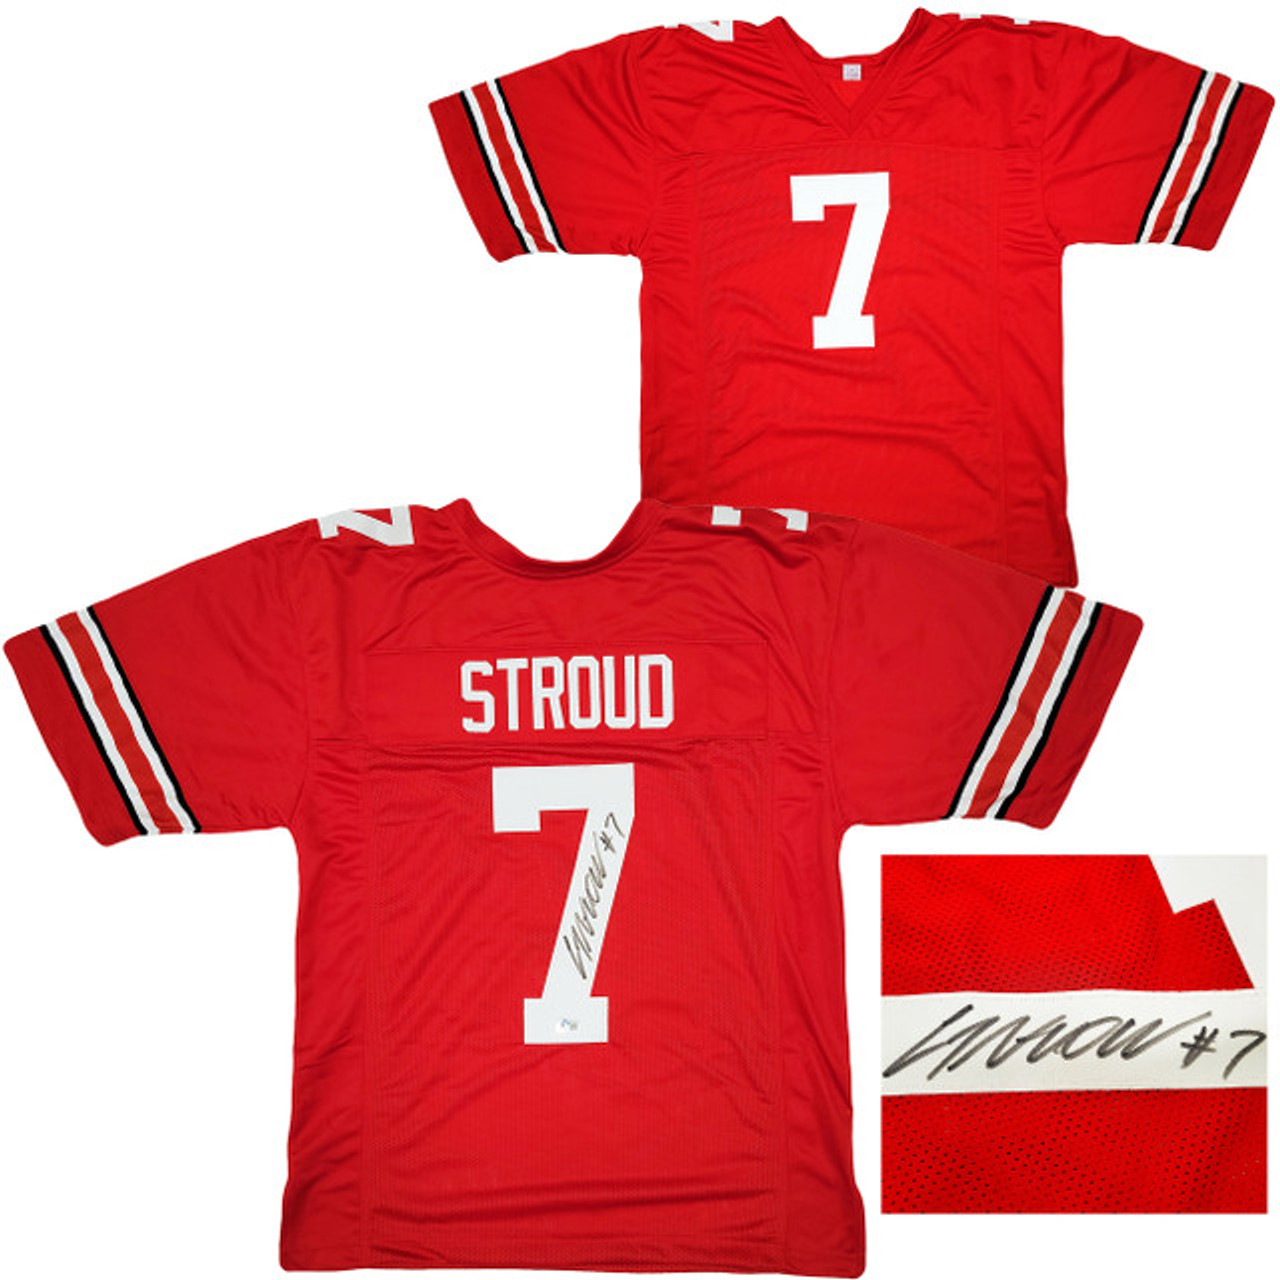 Shop CJ Stroud Ohio State Buckeyes Signed Red Jersey at Nikco Sports